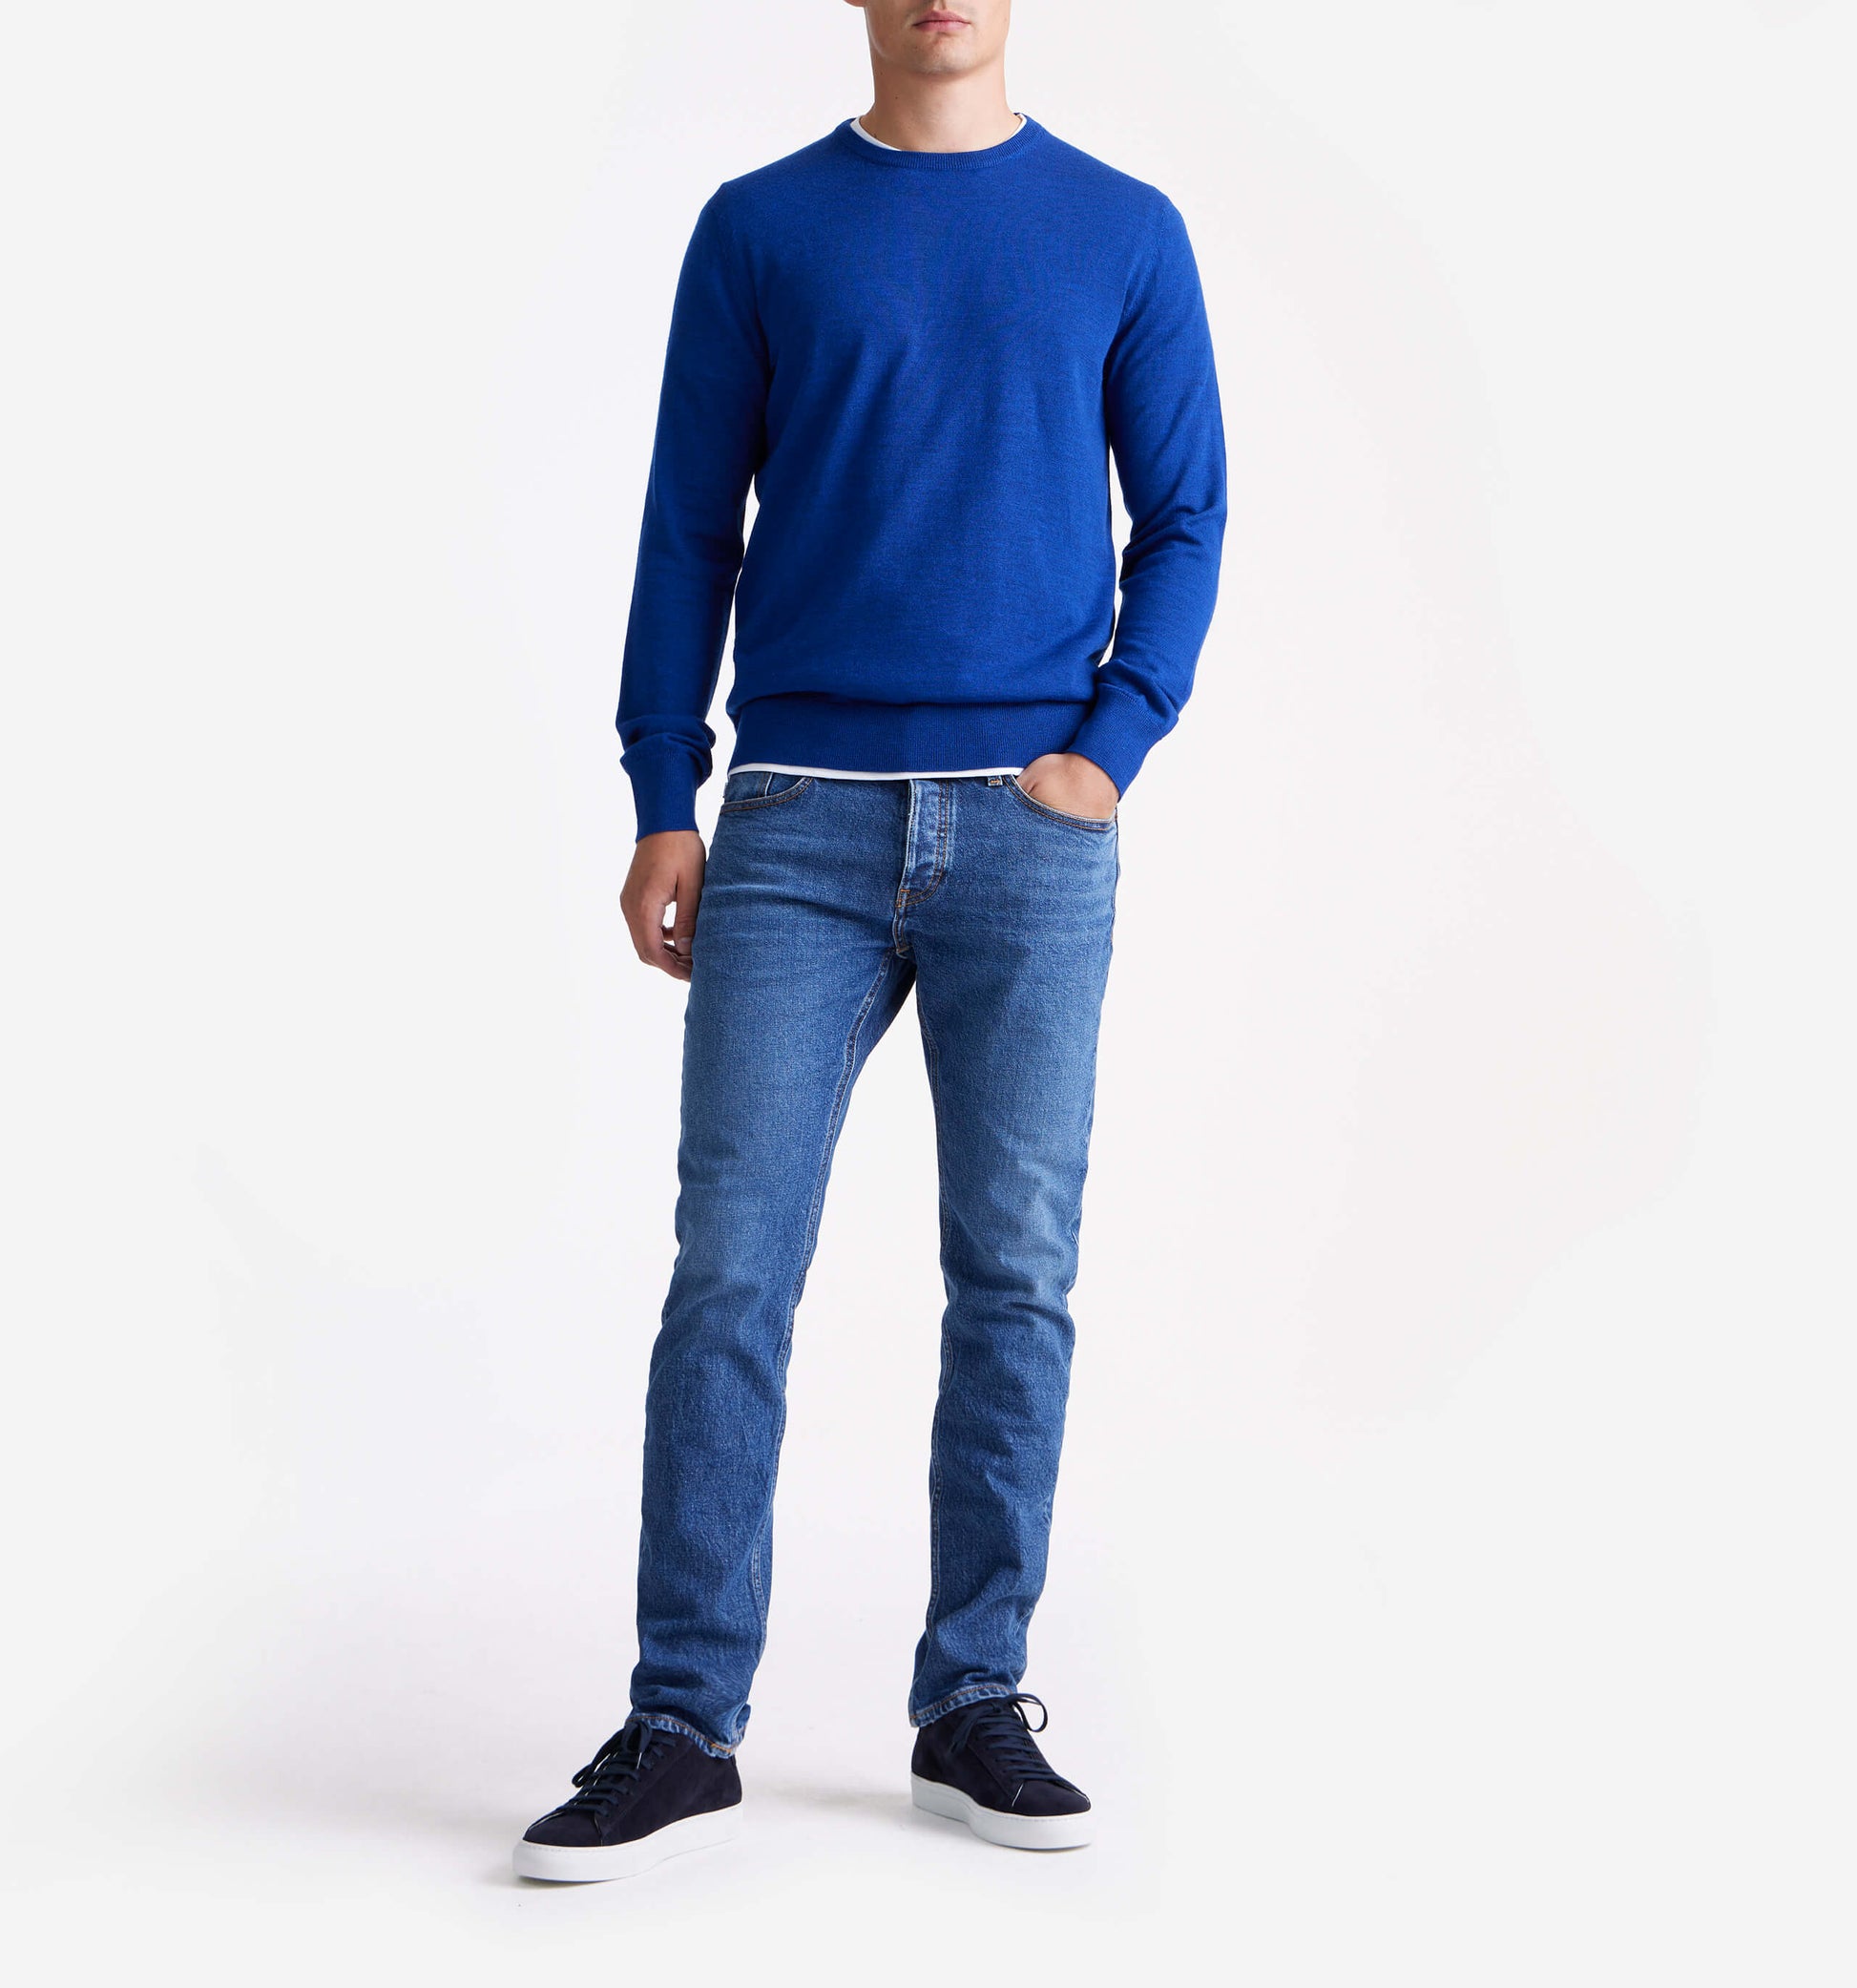 The John - Merino Wool Crewneck In Royal Blue From King Essentials